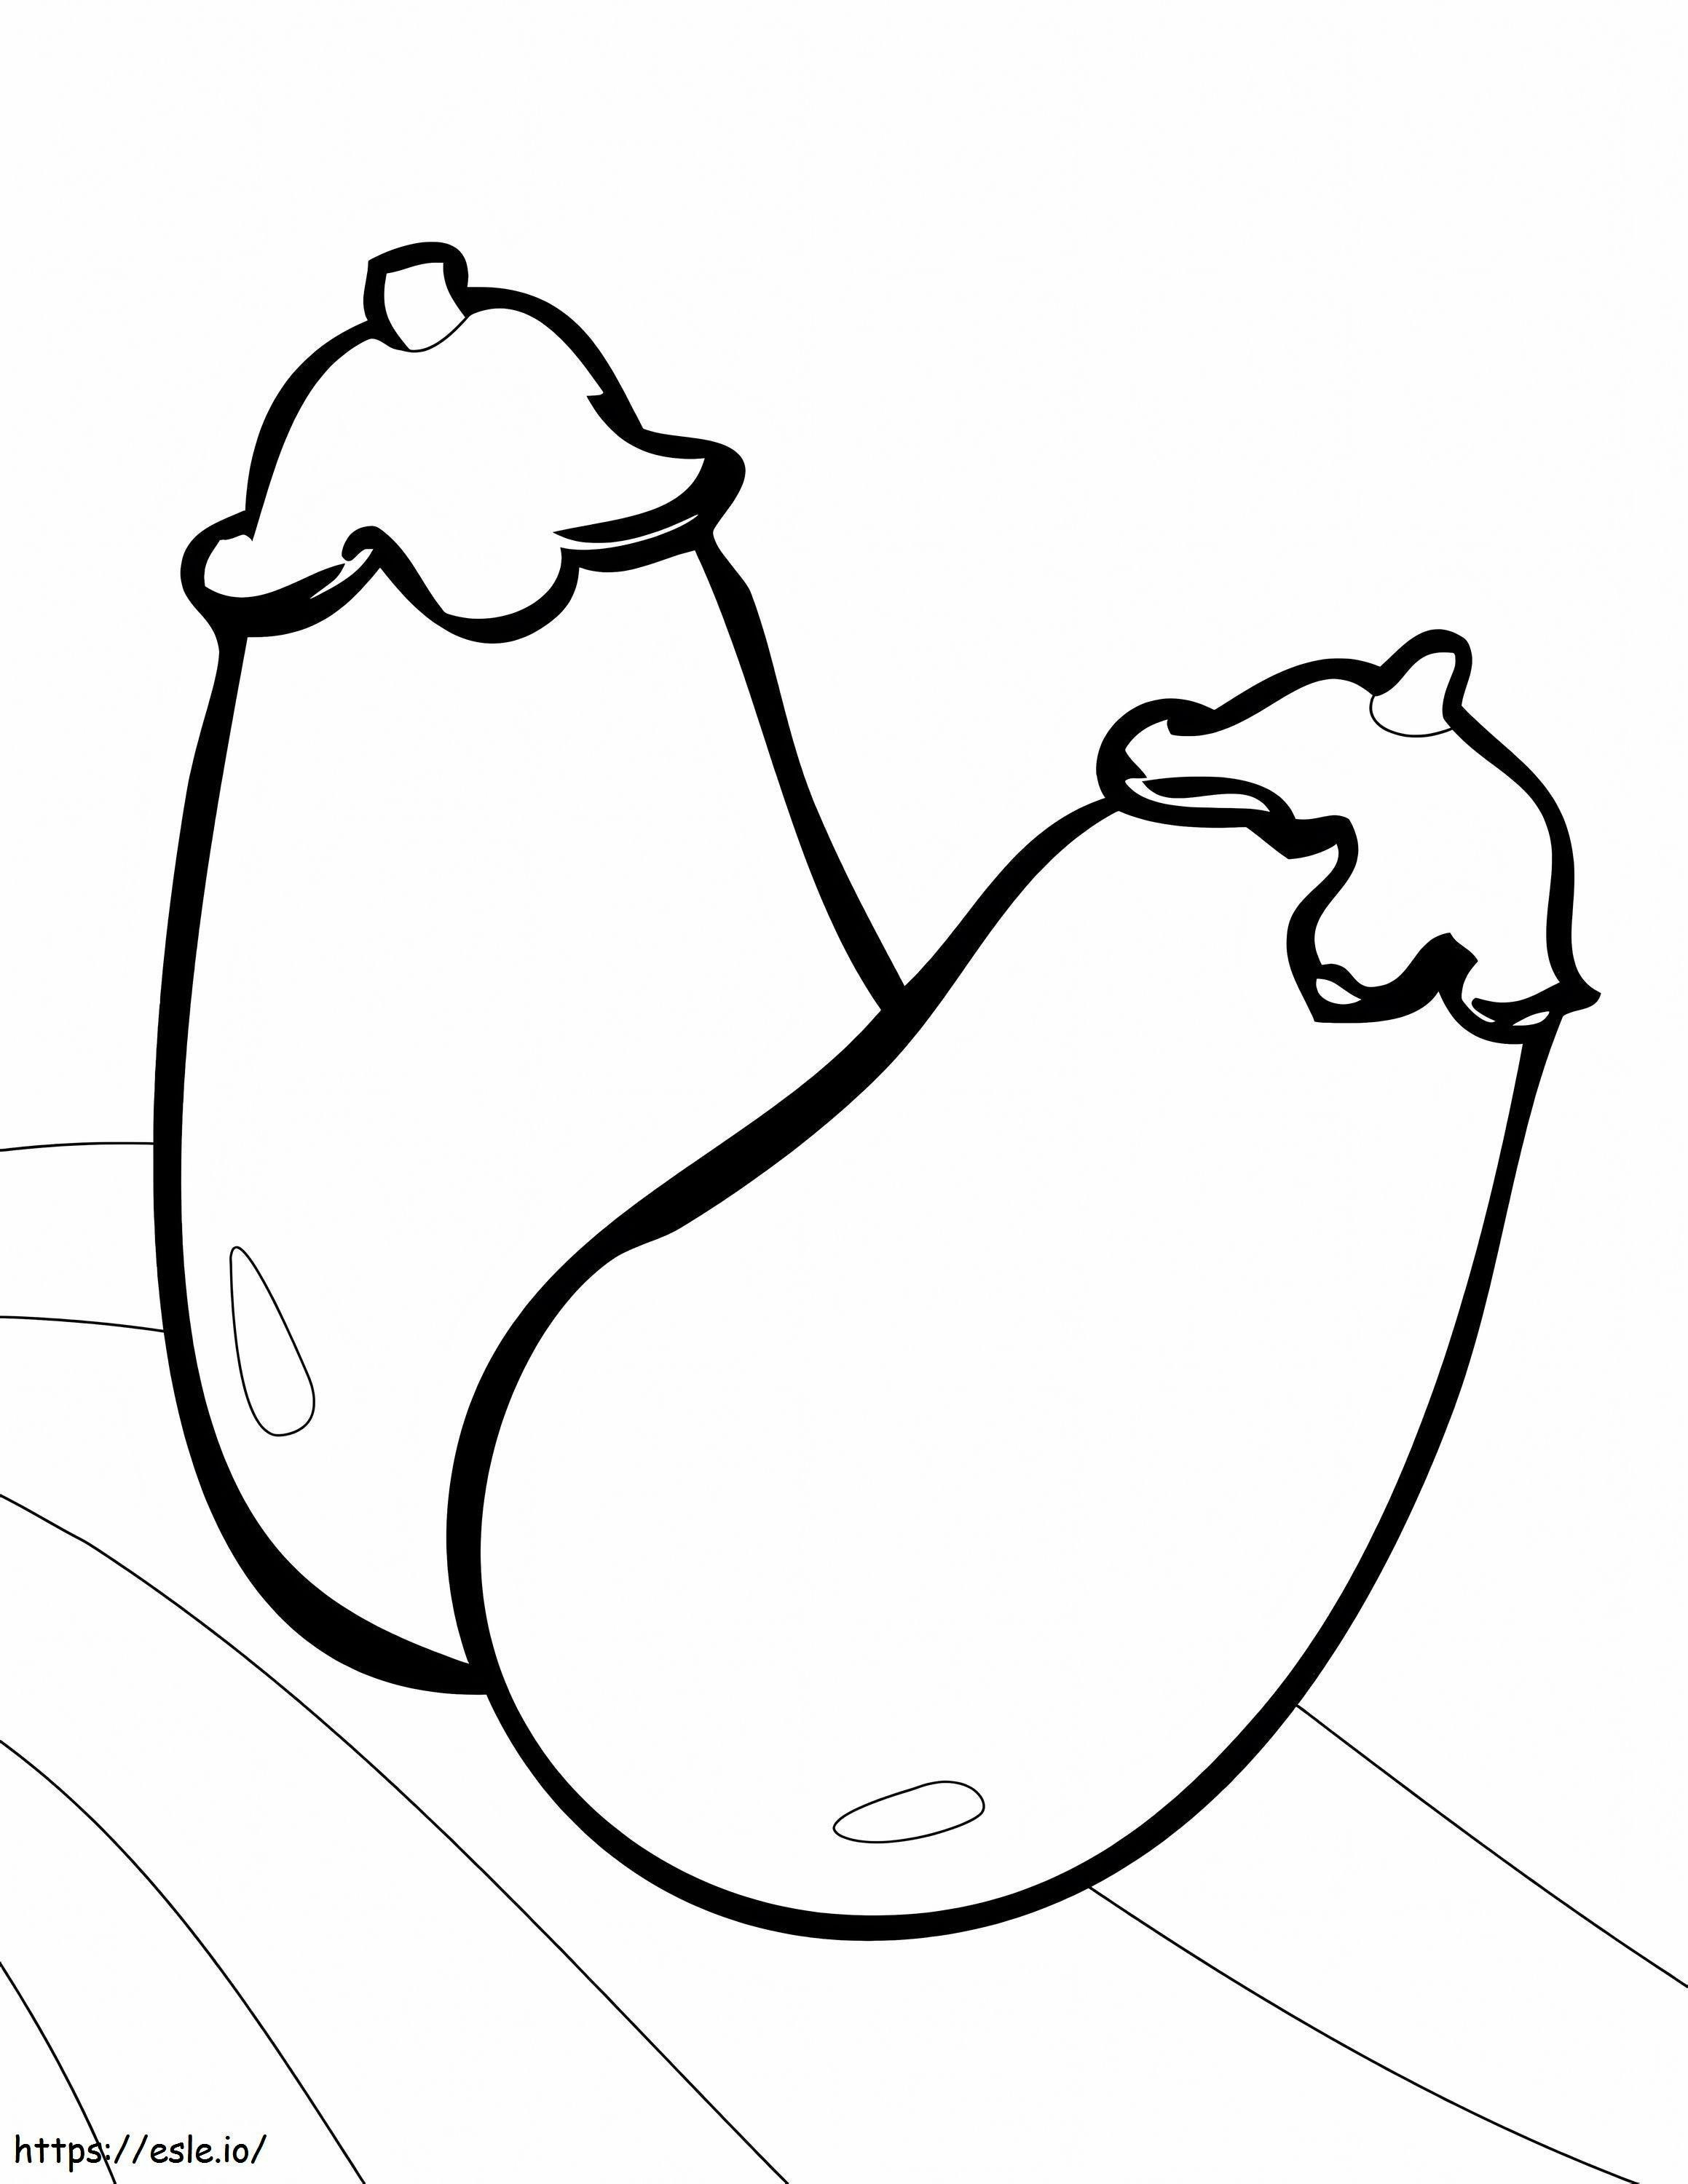 Two Basic Eggplants coloring page